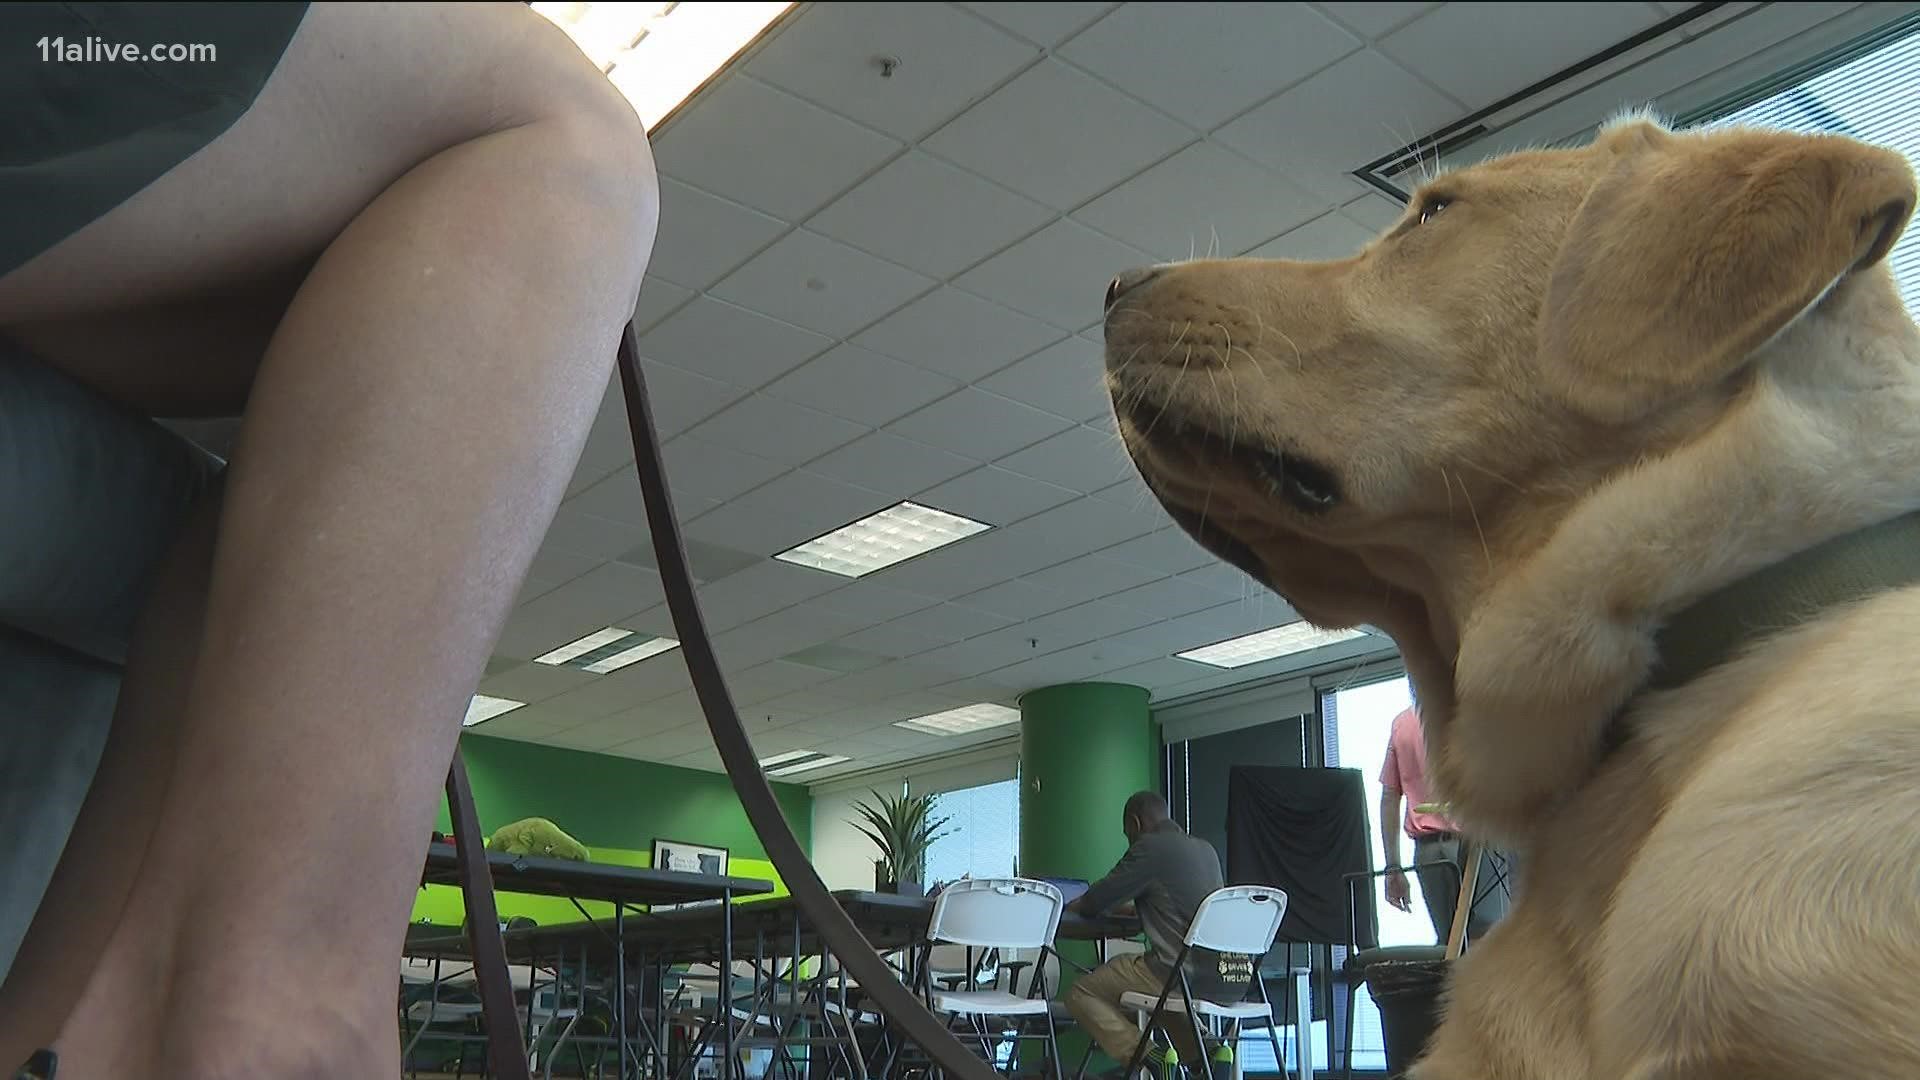 Veterans who spent time in Afghanistan are struggling and turning to service dogs to help support their mental health.